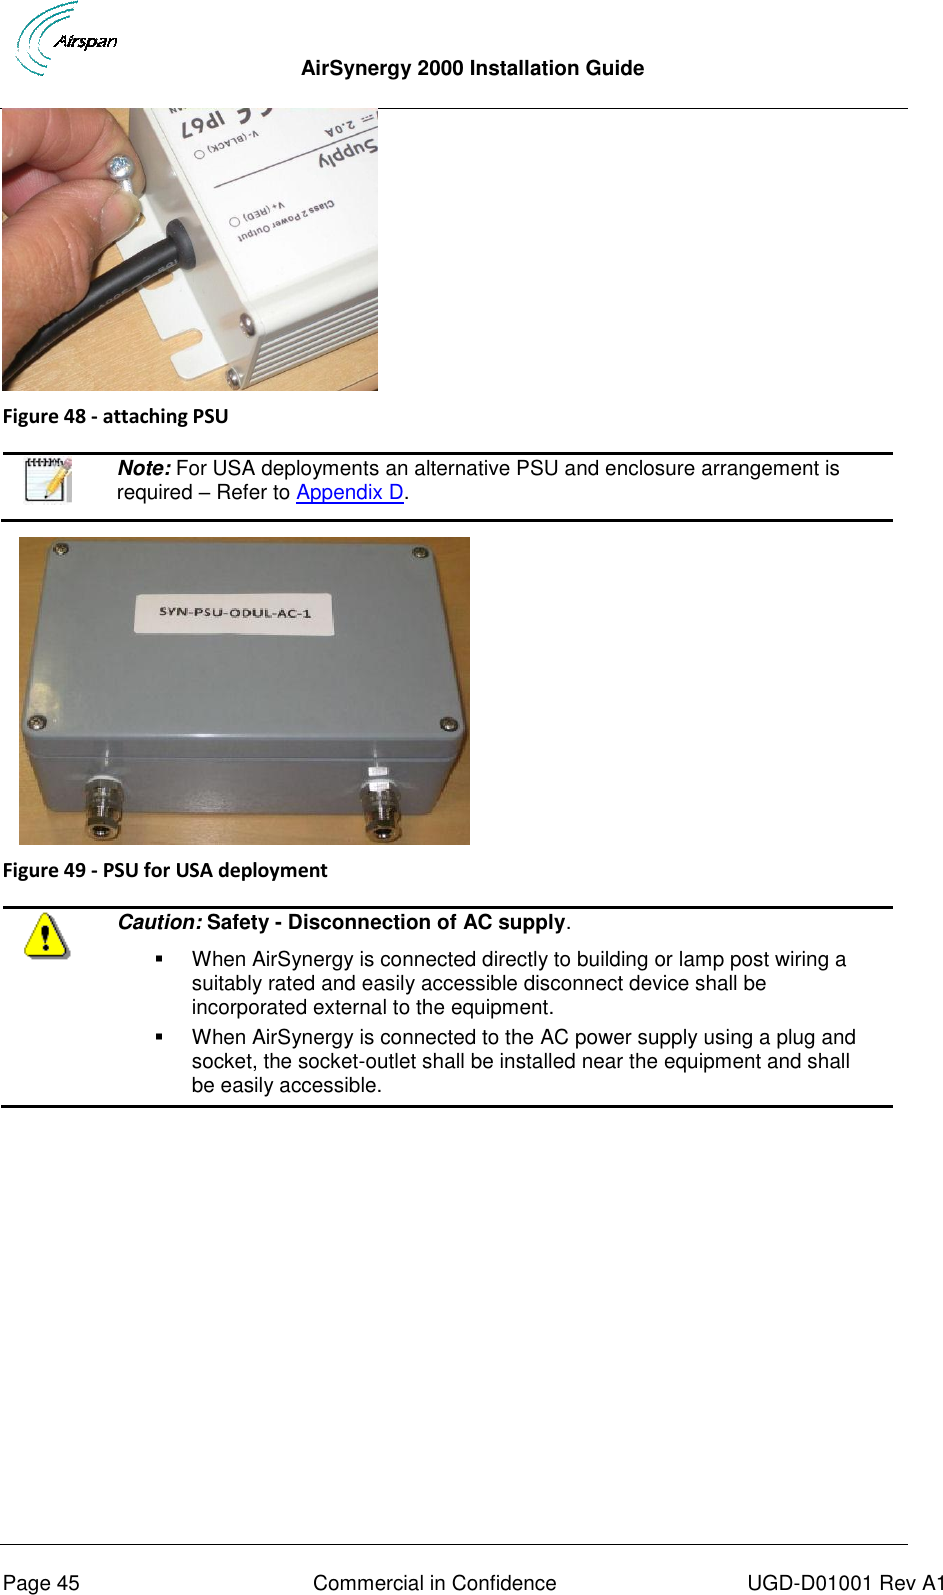  AirSynergy 2000 Installation Guide     Page 45  Commercial in Confidence  UGD-D01001 Rev A1  Figure 48 - attaching PSU    Note: For USA deployments an alternative PSU and enclosure arrangement is required – Refer to Appendix D.        Figure 49 - PSU for USA deployment   Caution: Safety - Disconnection of AC supply.   When AirSynergy is connected directly to building or lamp post wiring a suitably rated and easily accessible disconnect device shall be incorporated external to the equipment.    When AirSynergy is connected to the AC power supply using a plug and socket, the socket-outlet shall be installed near the equipment and shall be easily accessible.   